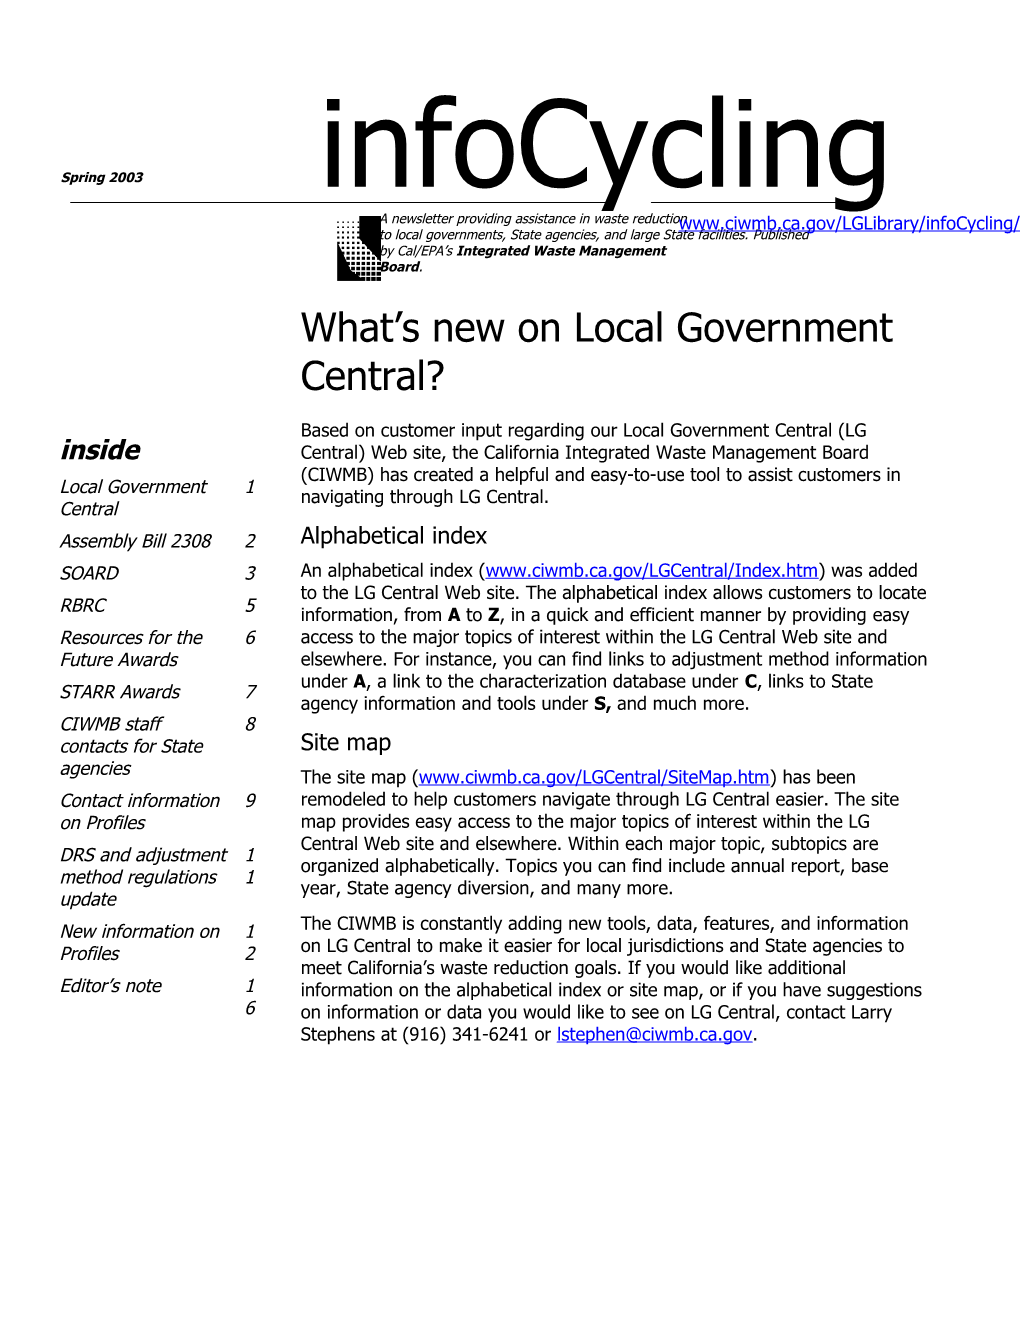 What S New on Local Government Central?